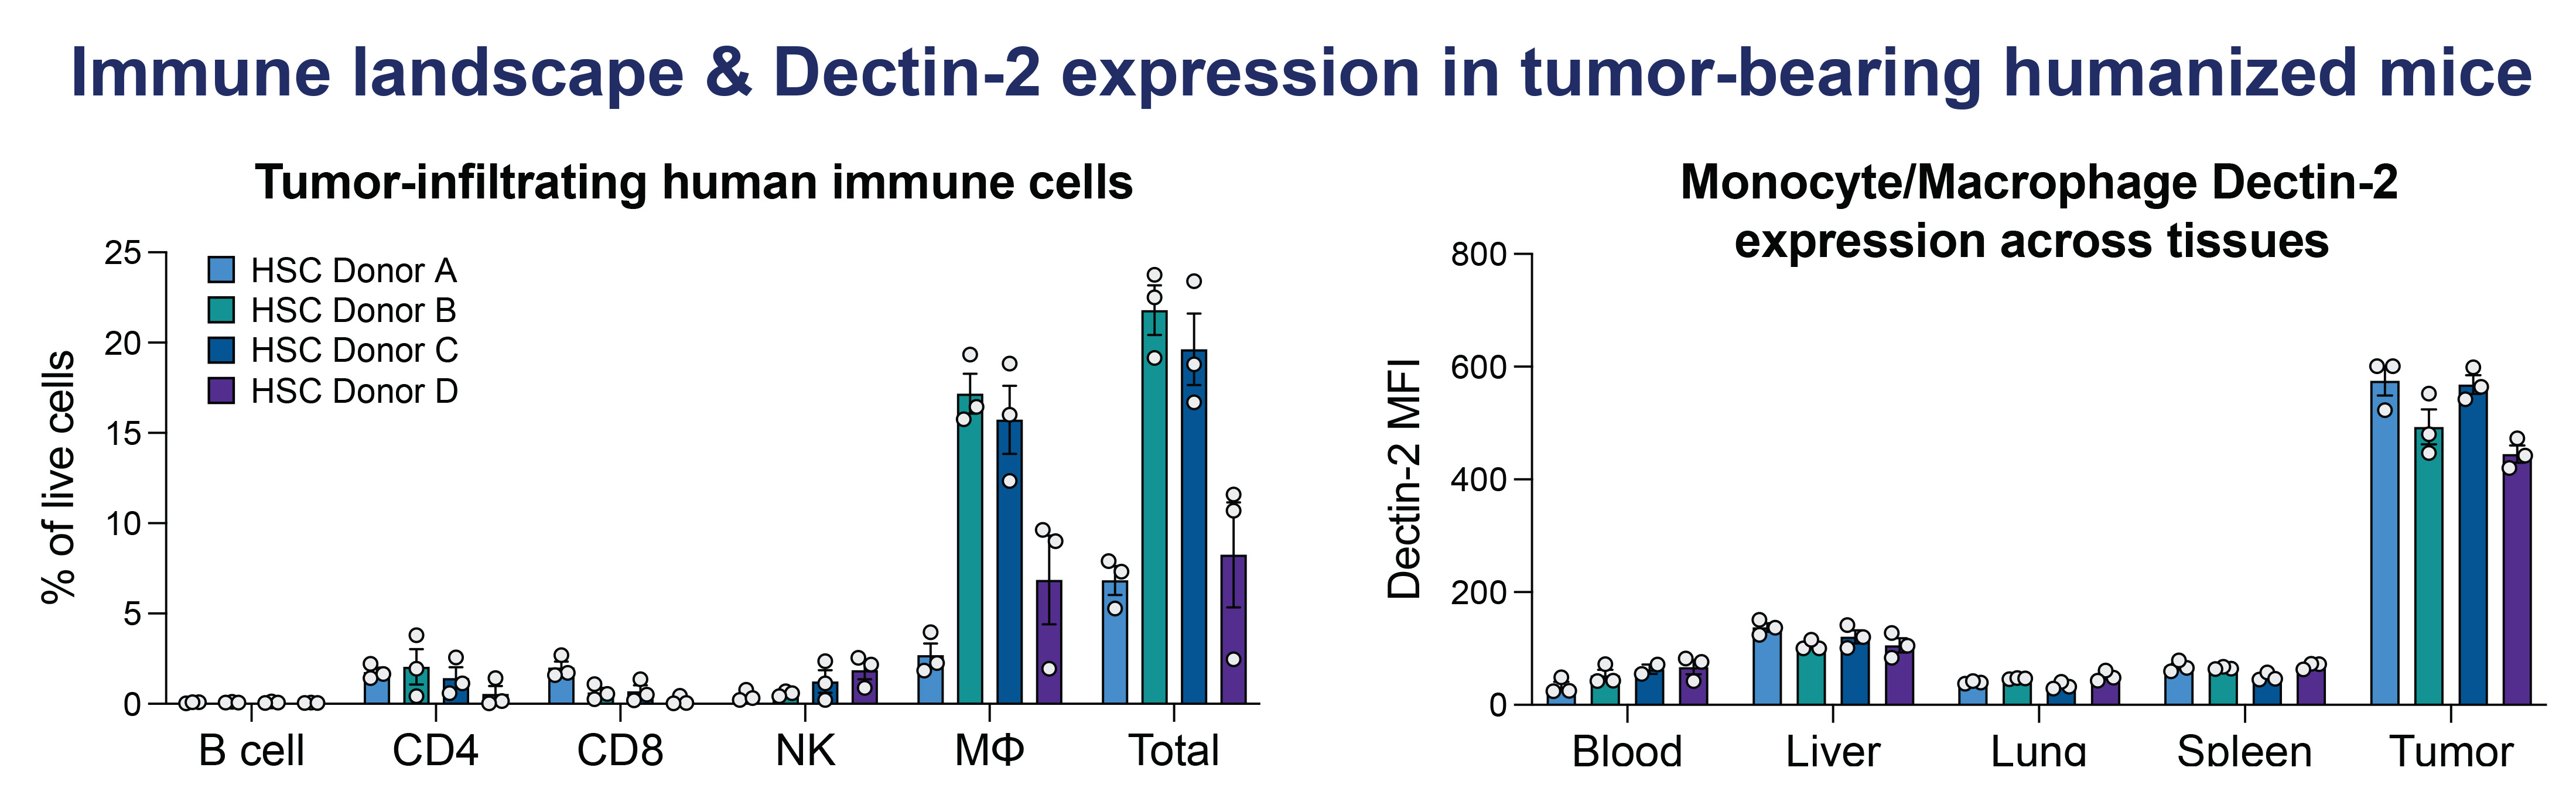 image for Immune landscape and Dectin-2 expression in tumor-bearing humanized mice